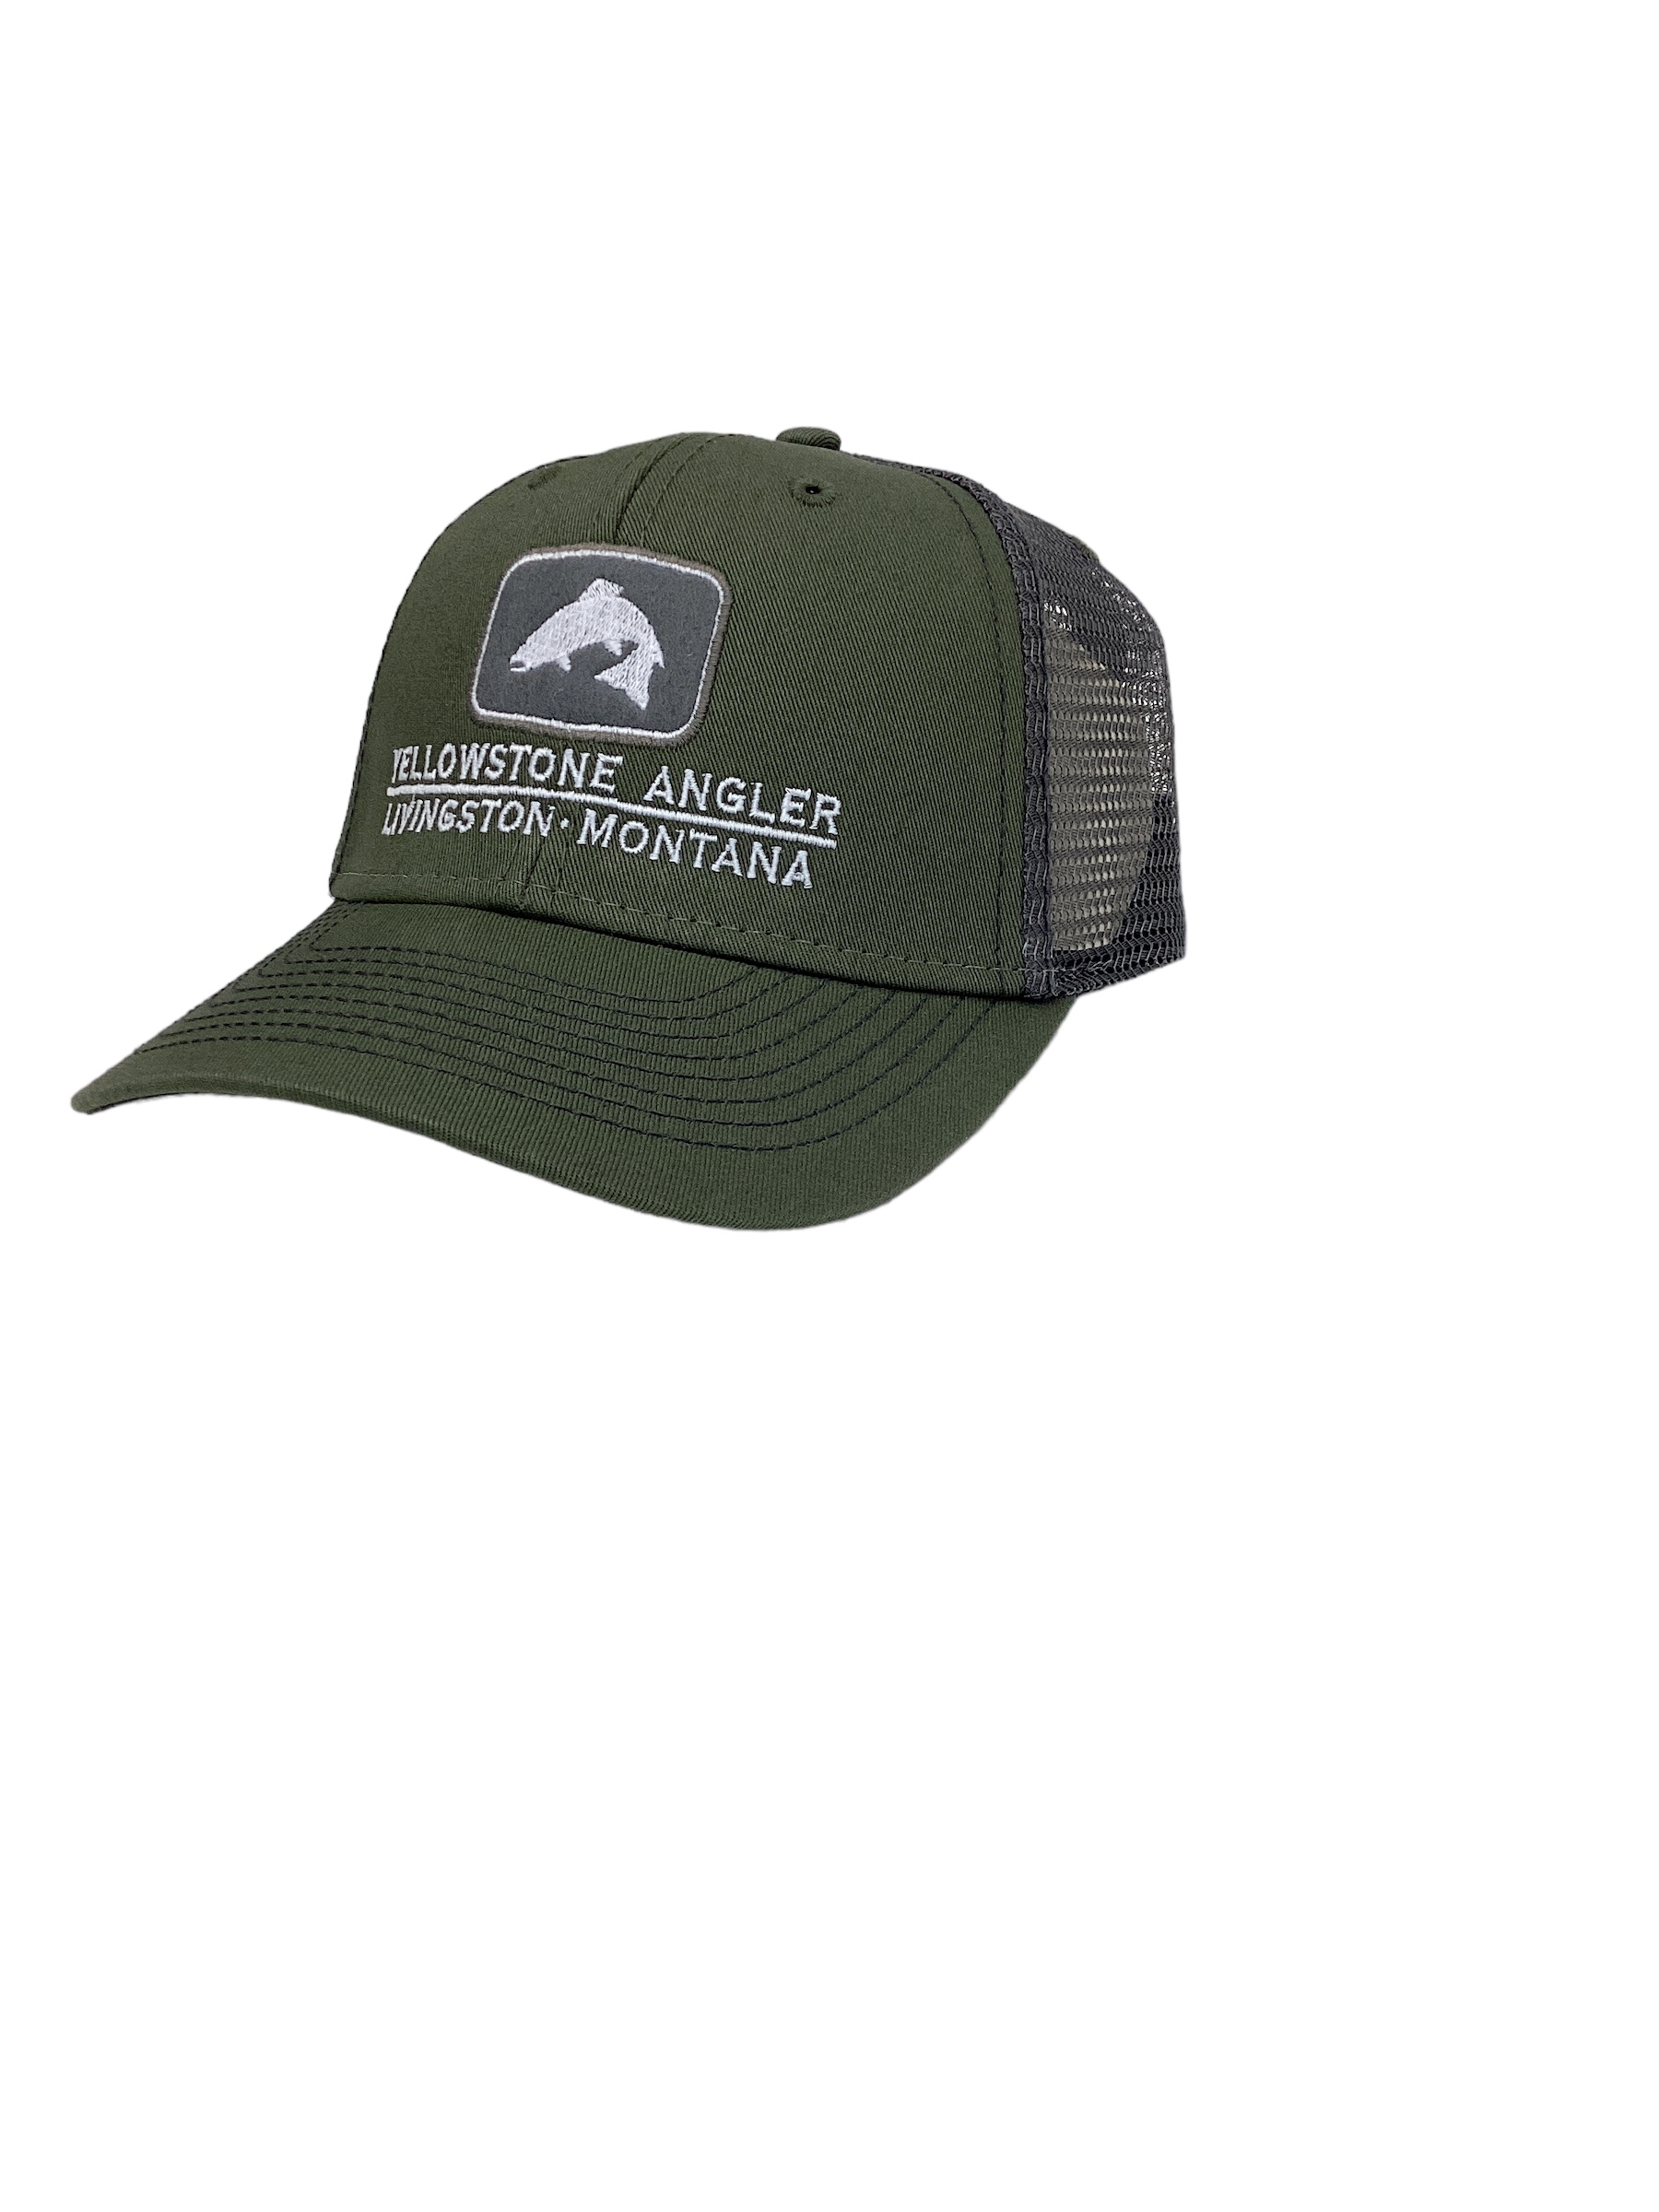 Yellowstone Angler Trout Icon Trucker Hat